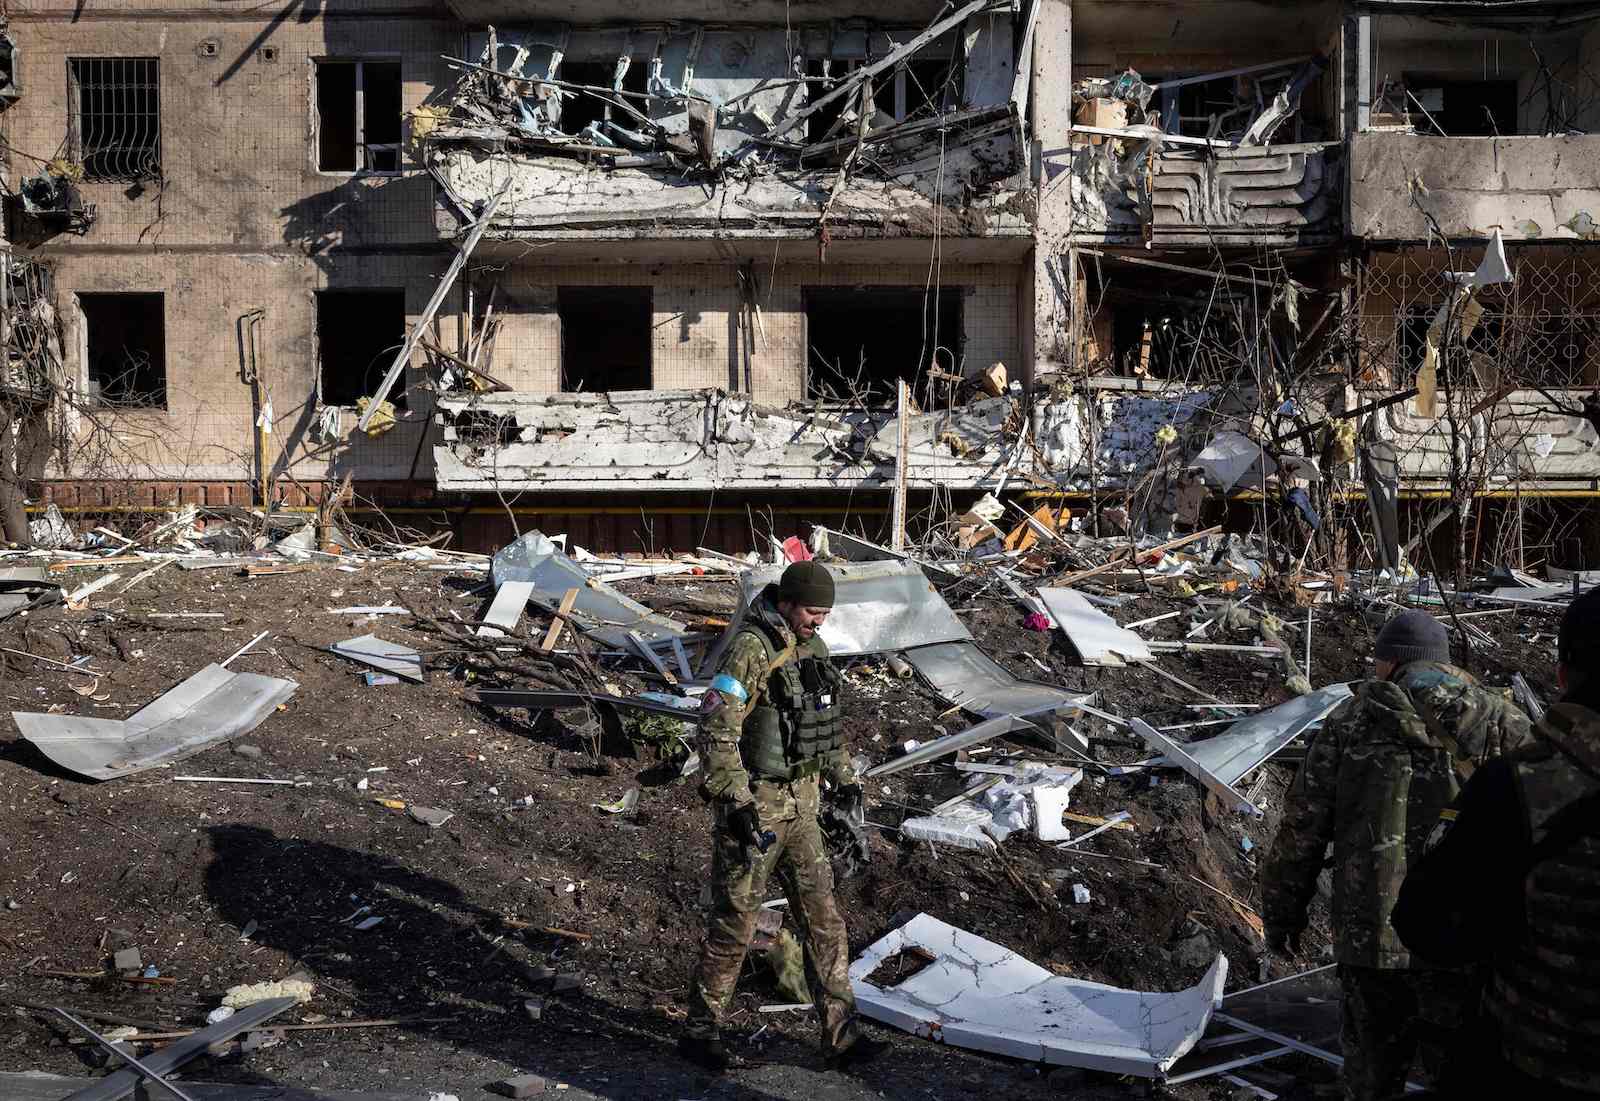 A Ukraine soldier inspects the rubble of a destroyed apartment building in Kyiv on 15 March (Fadel Senna/AFP via Getty Images)